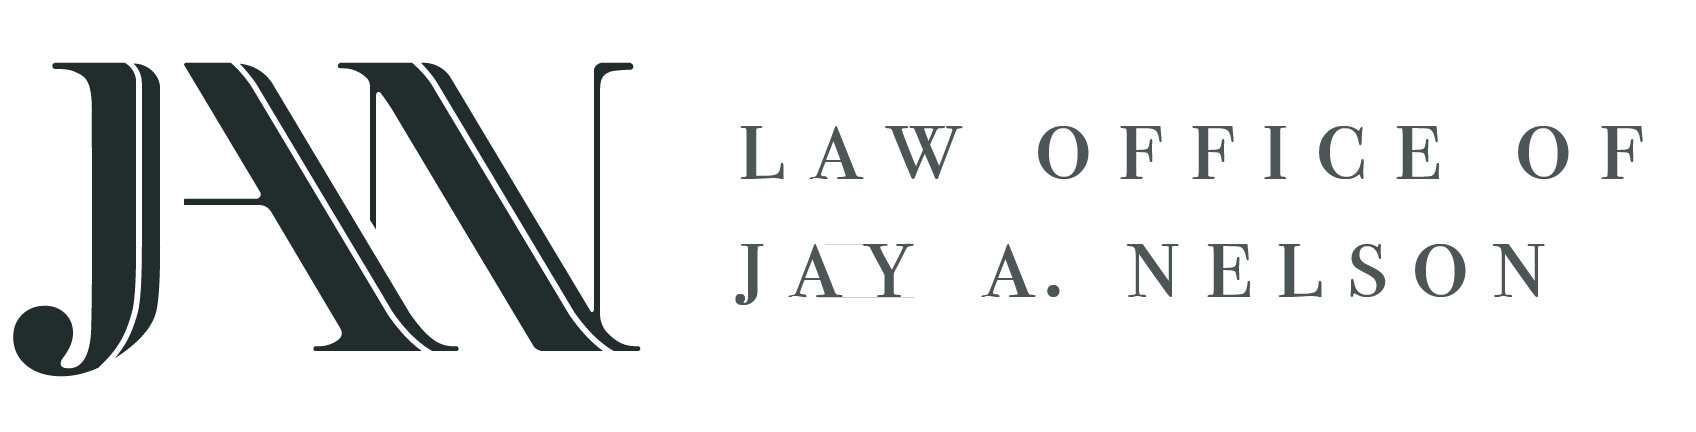 Law Office of Jay A. Nelson